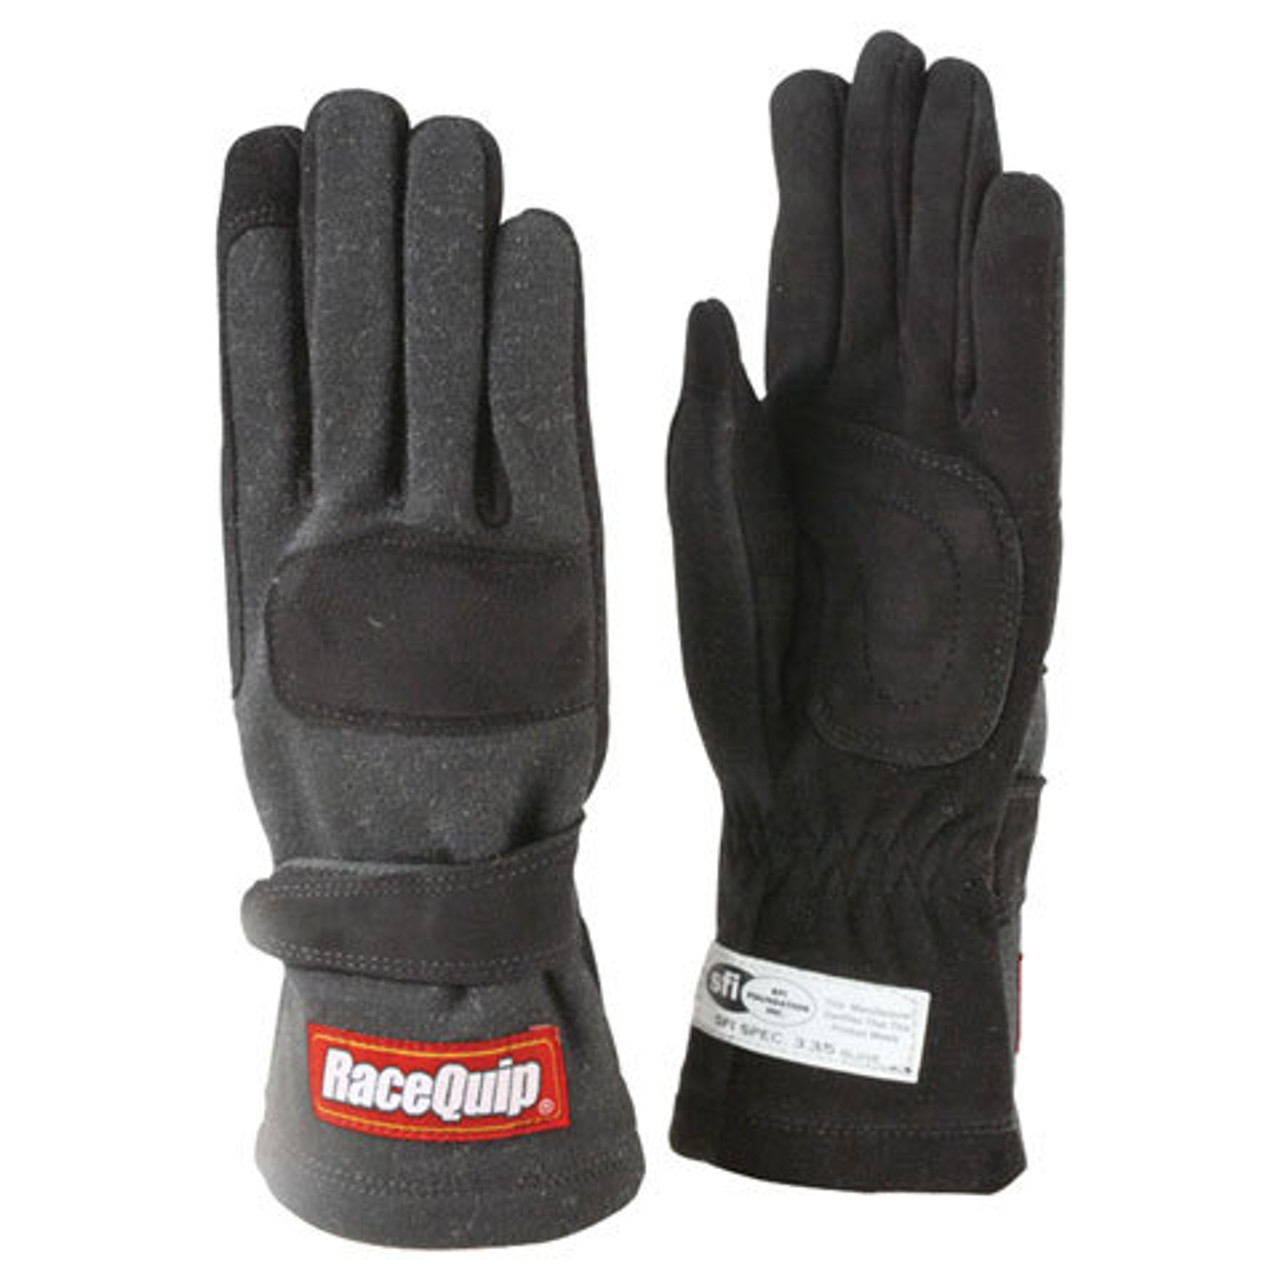 RaceQuip Gloves Double Layer X-Small Black SFI-5